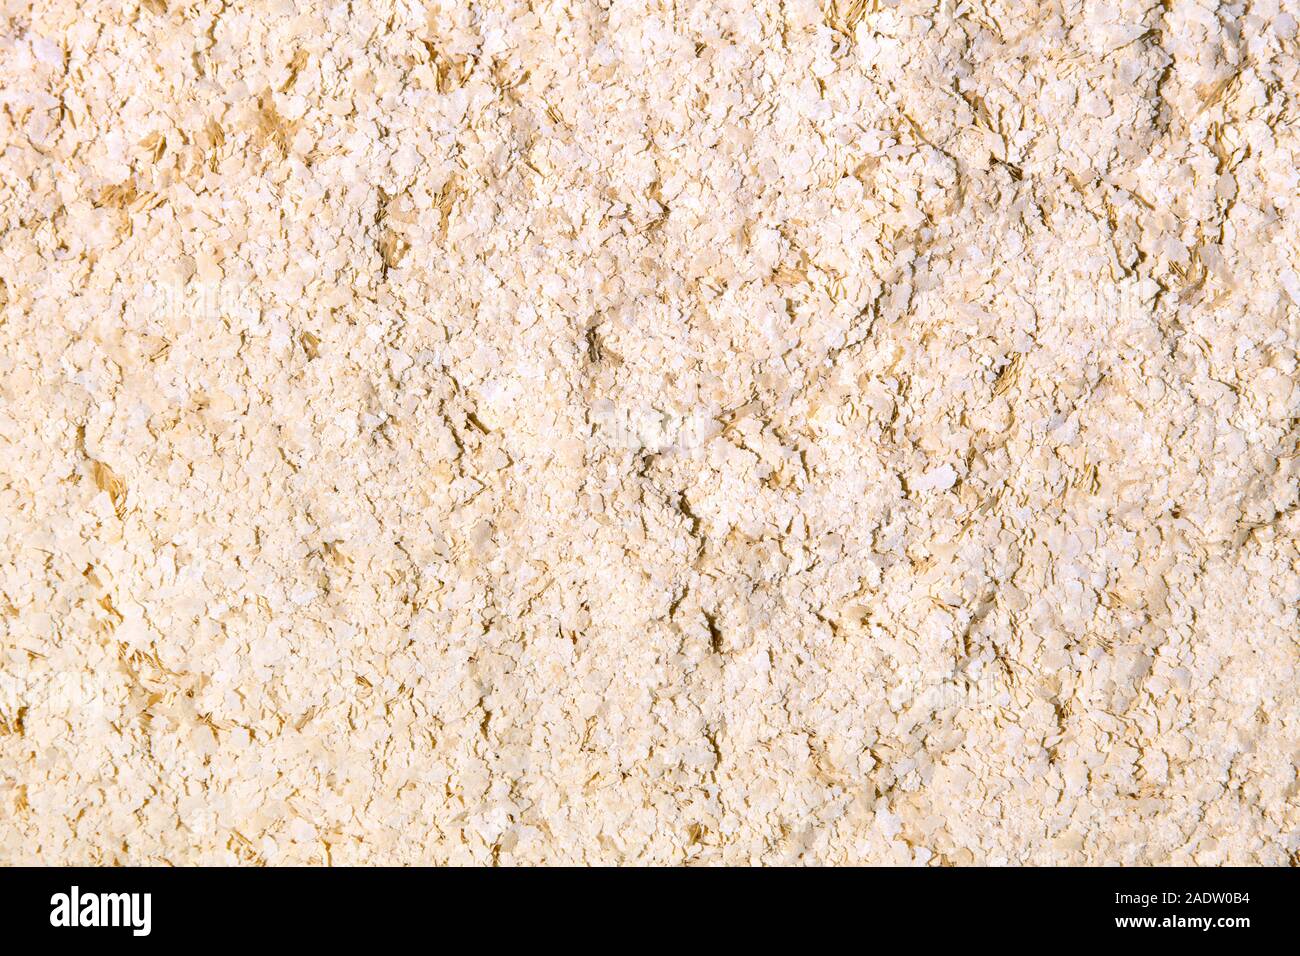 dried and raw Yeast flakes background, spice and dietary supplements superfood Stock Photo